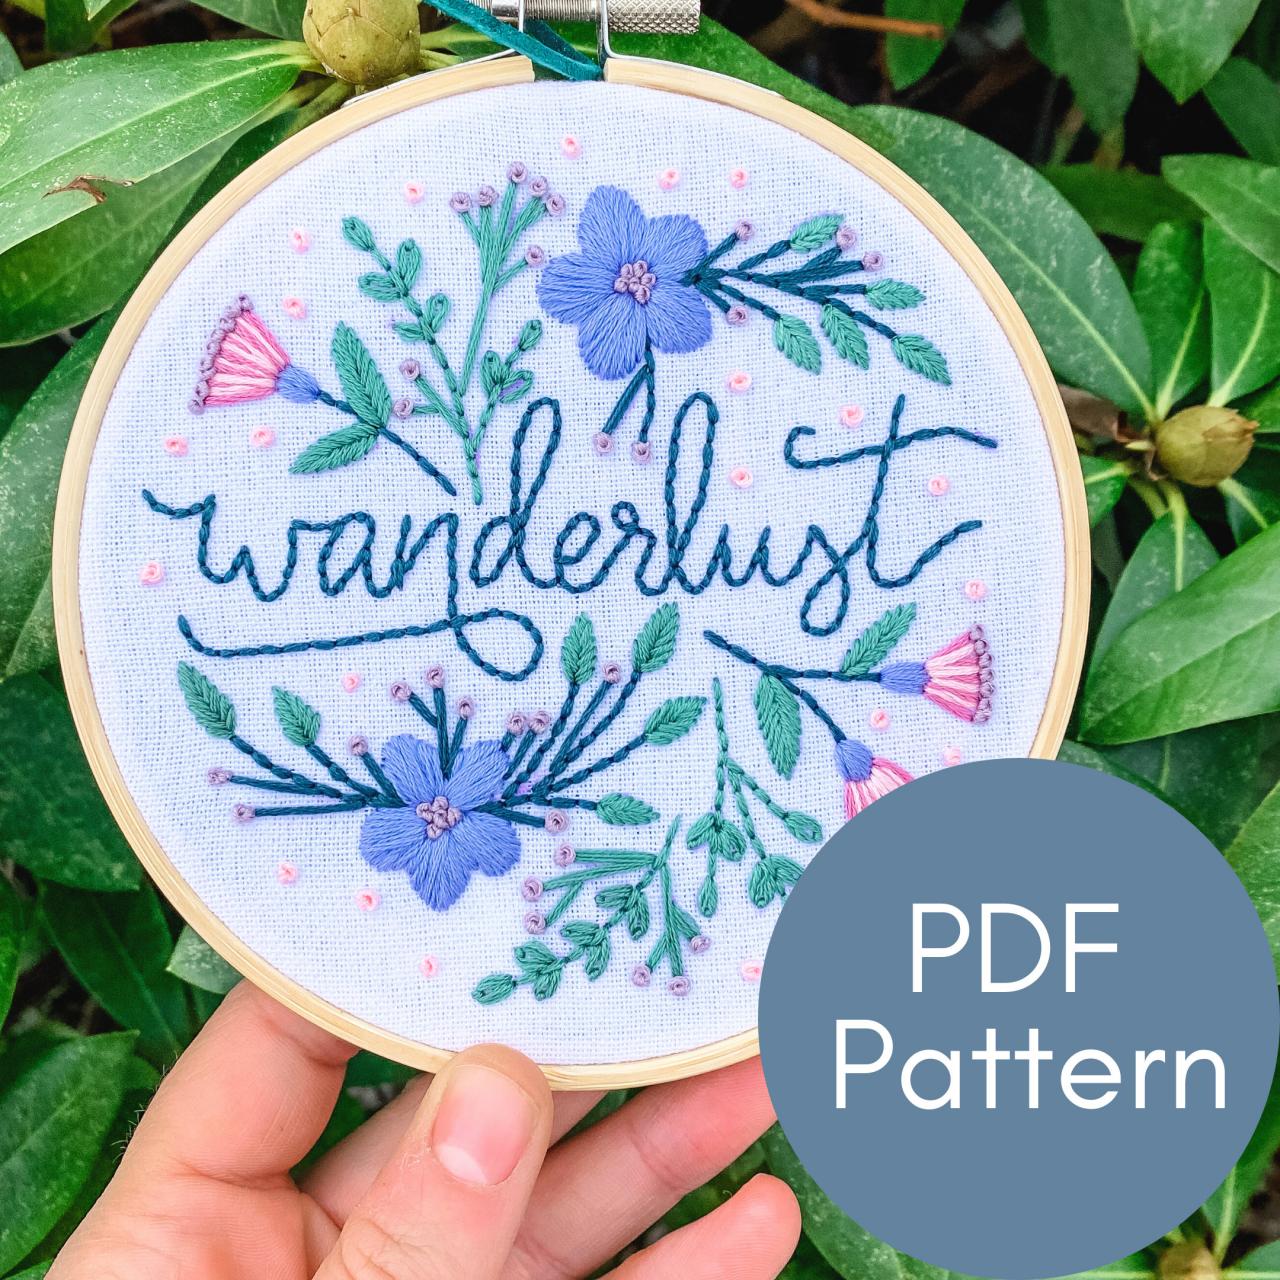 Wanderlust Embroidery Pattern | Hand Embroidery Pattern | Digital Download | Travel Embroidery | Modern Embroidery | Wanderer | DIY Art